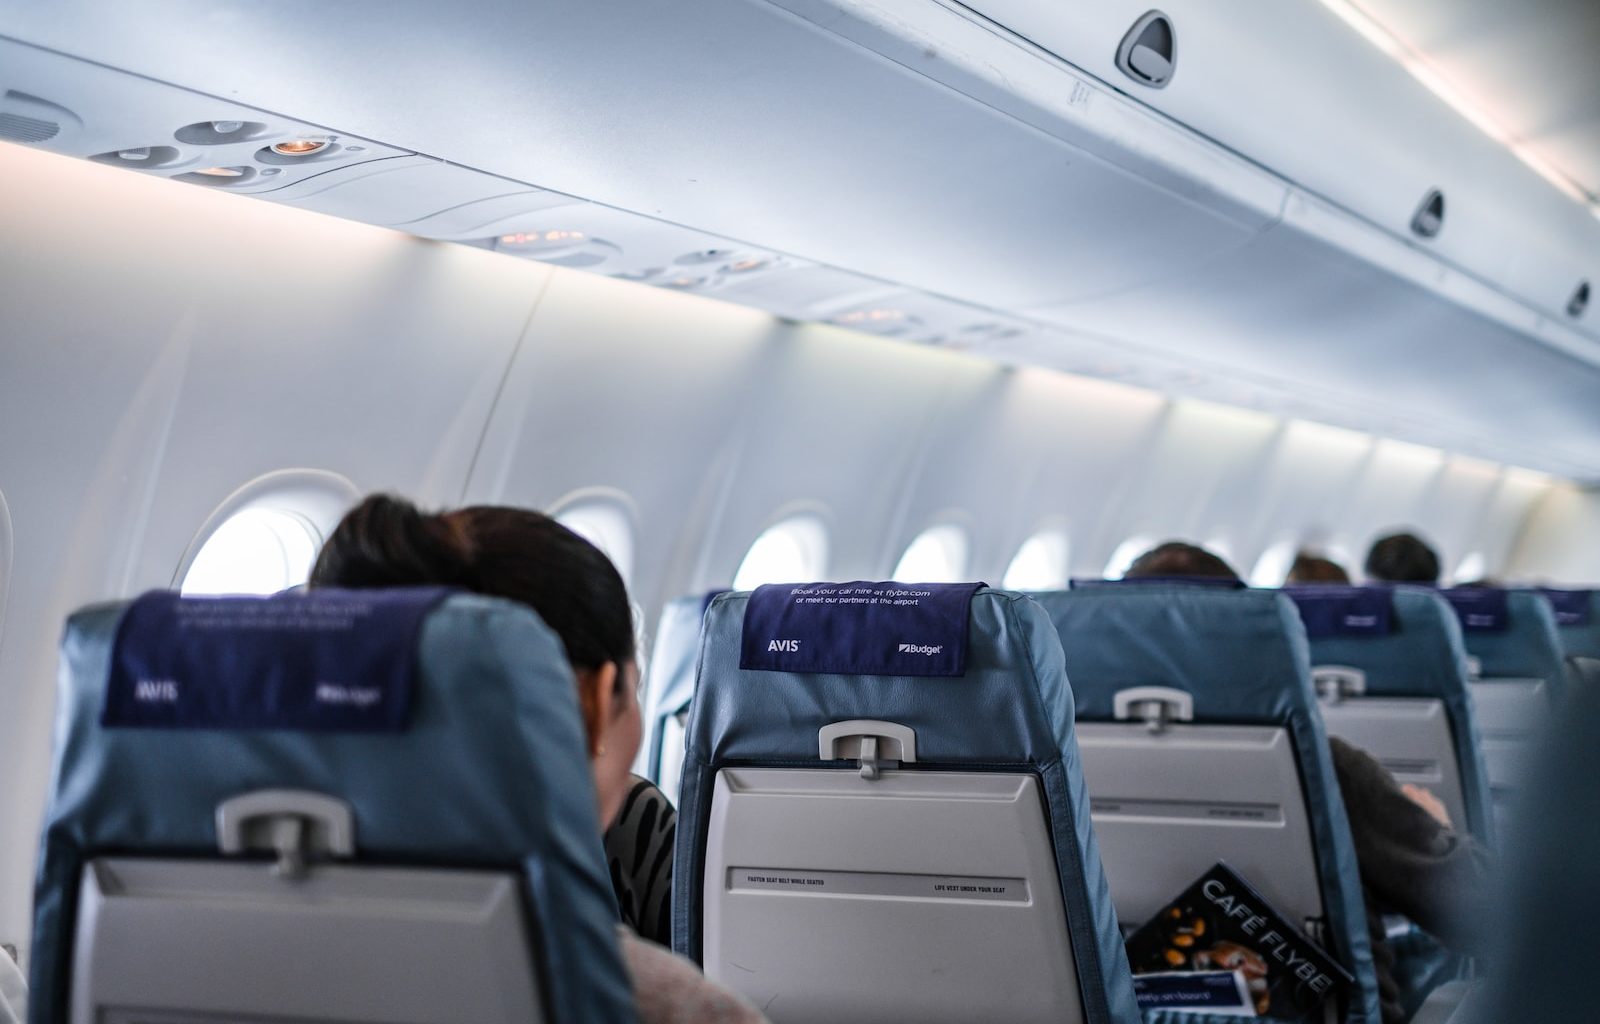 people sitting on gray and white airplane seats